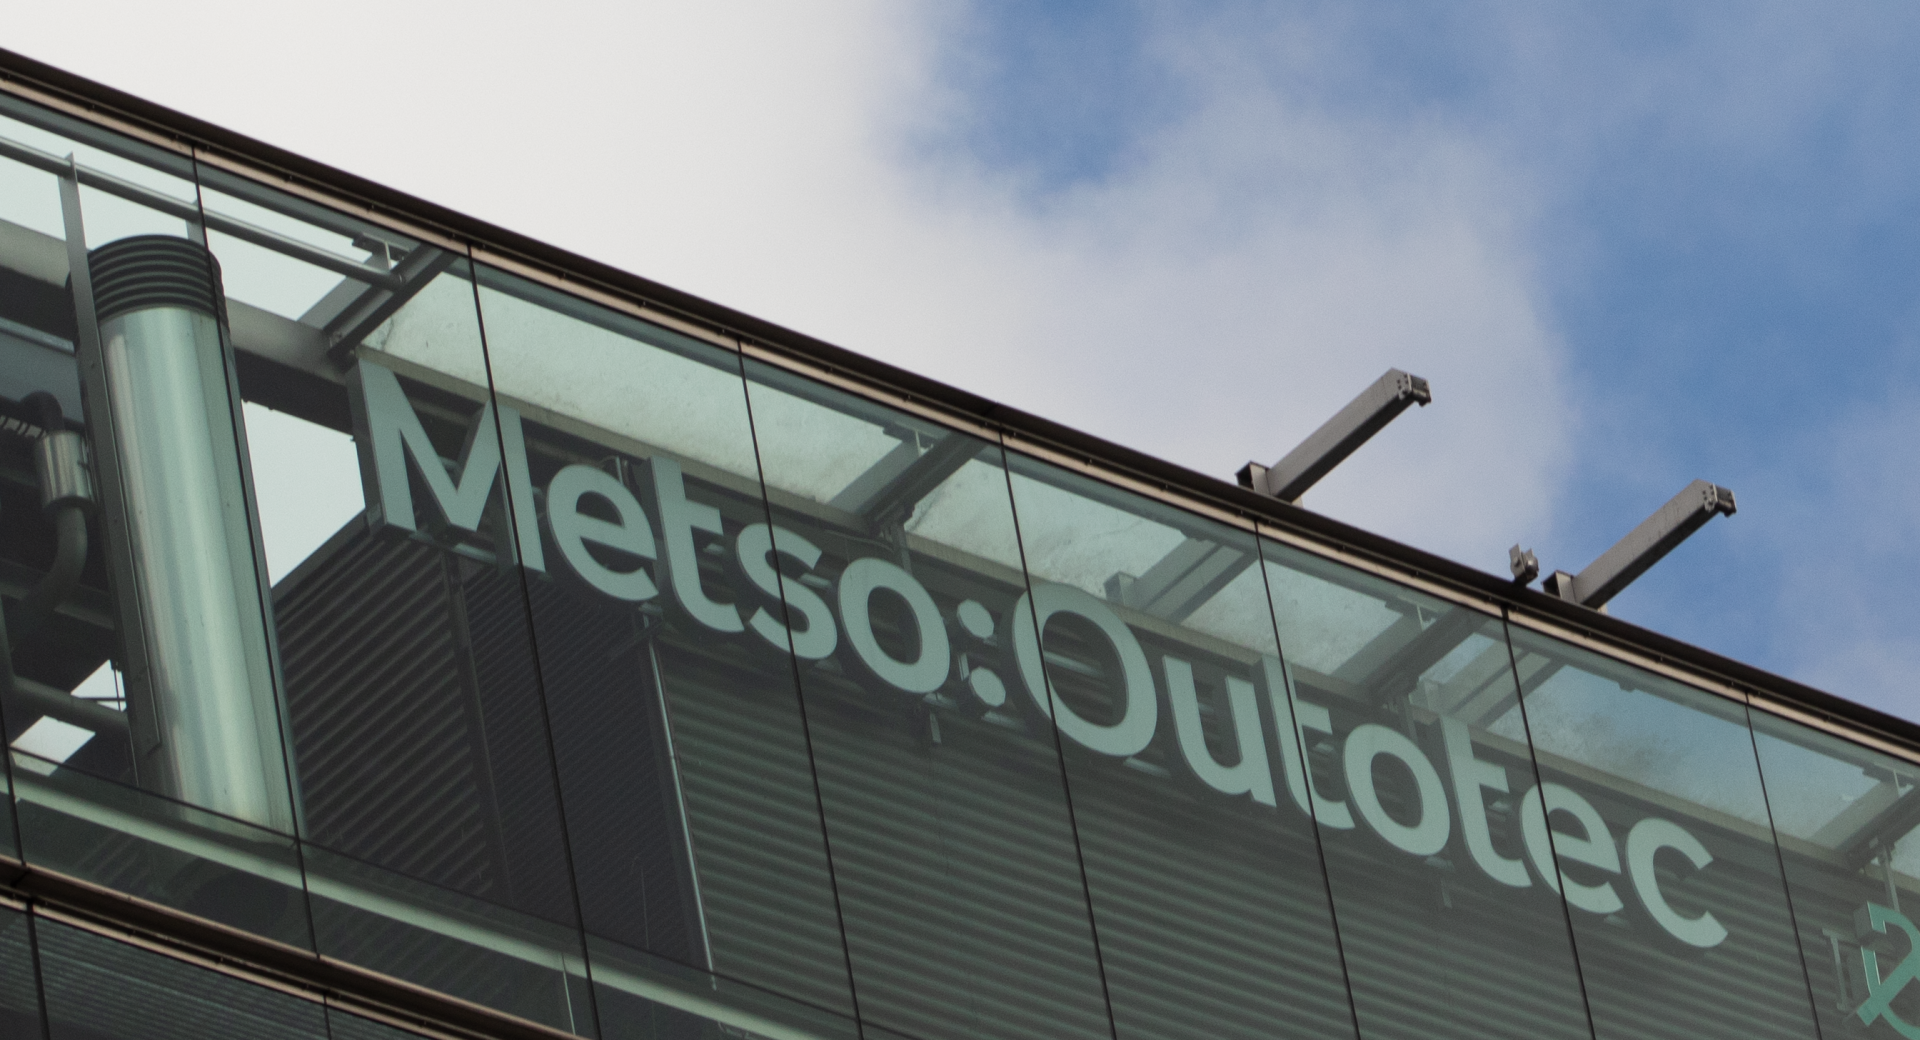 Metso Outotec logo on a building